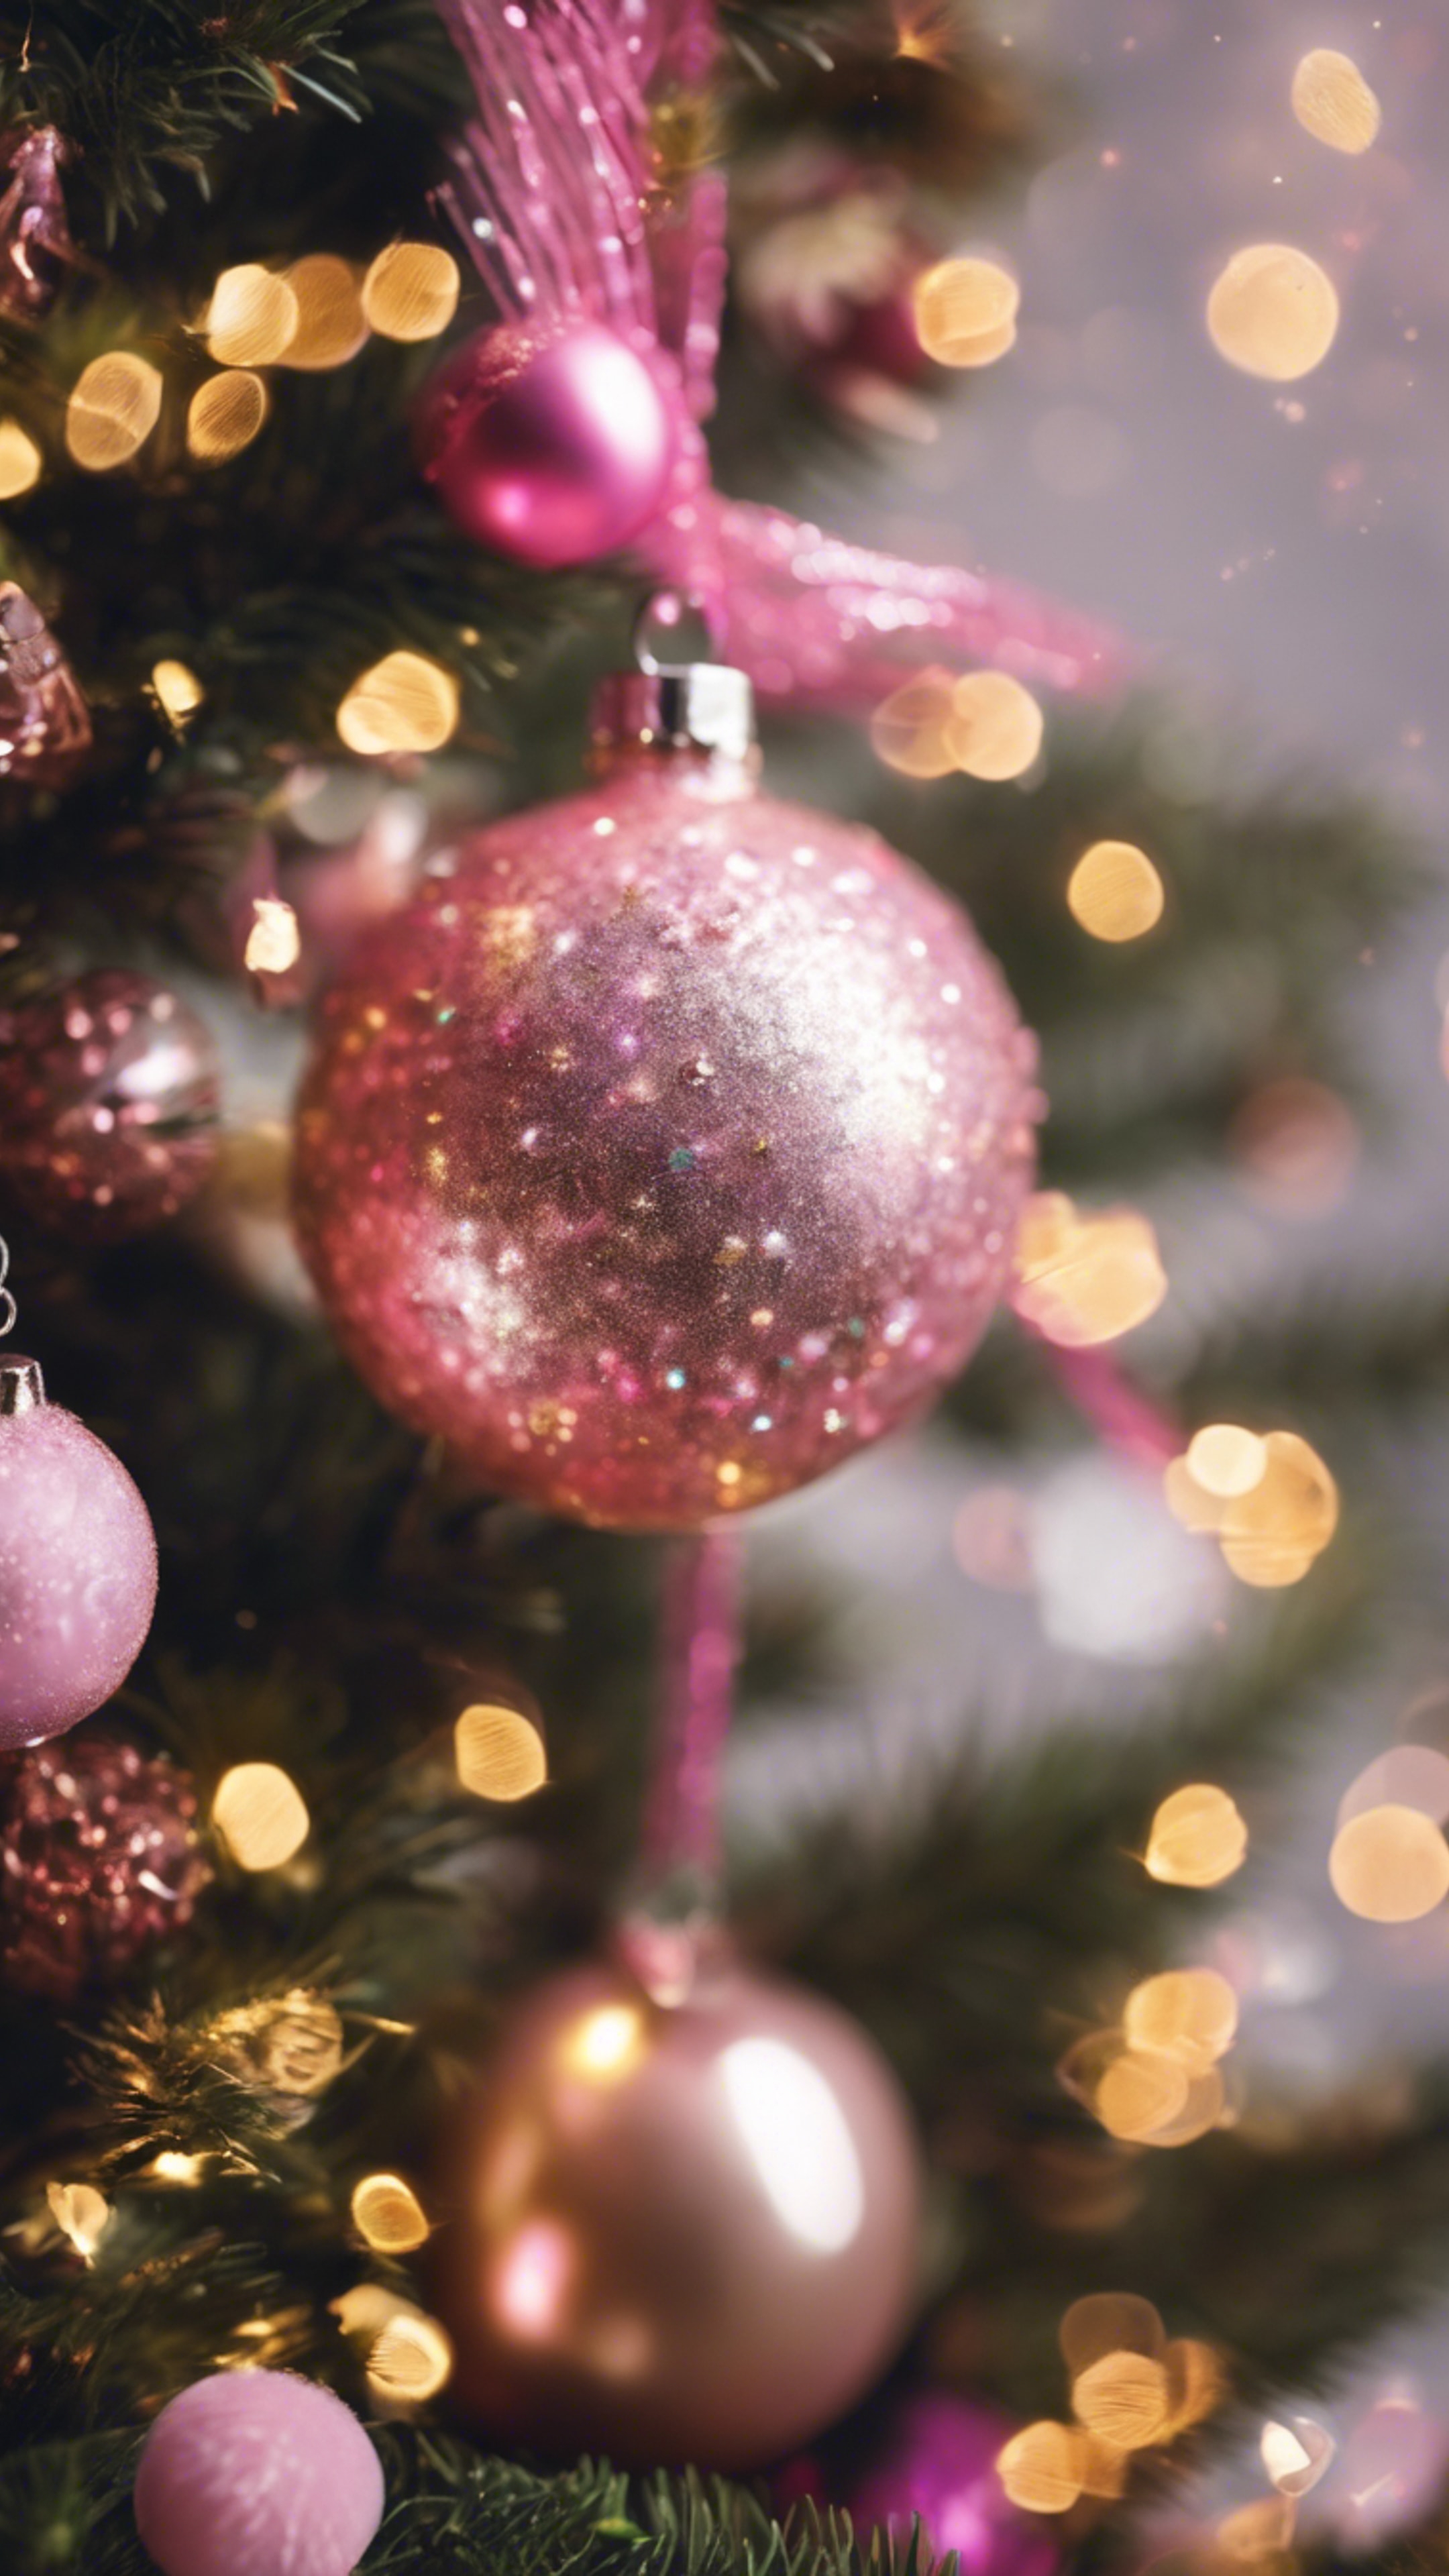 A festive Christmas tree ornamented with pink and gold baubles and glittery tinsel.壁紙[f12642b0ba1f422cacfa]